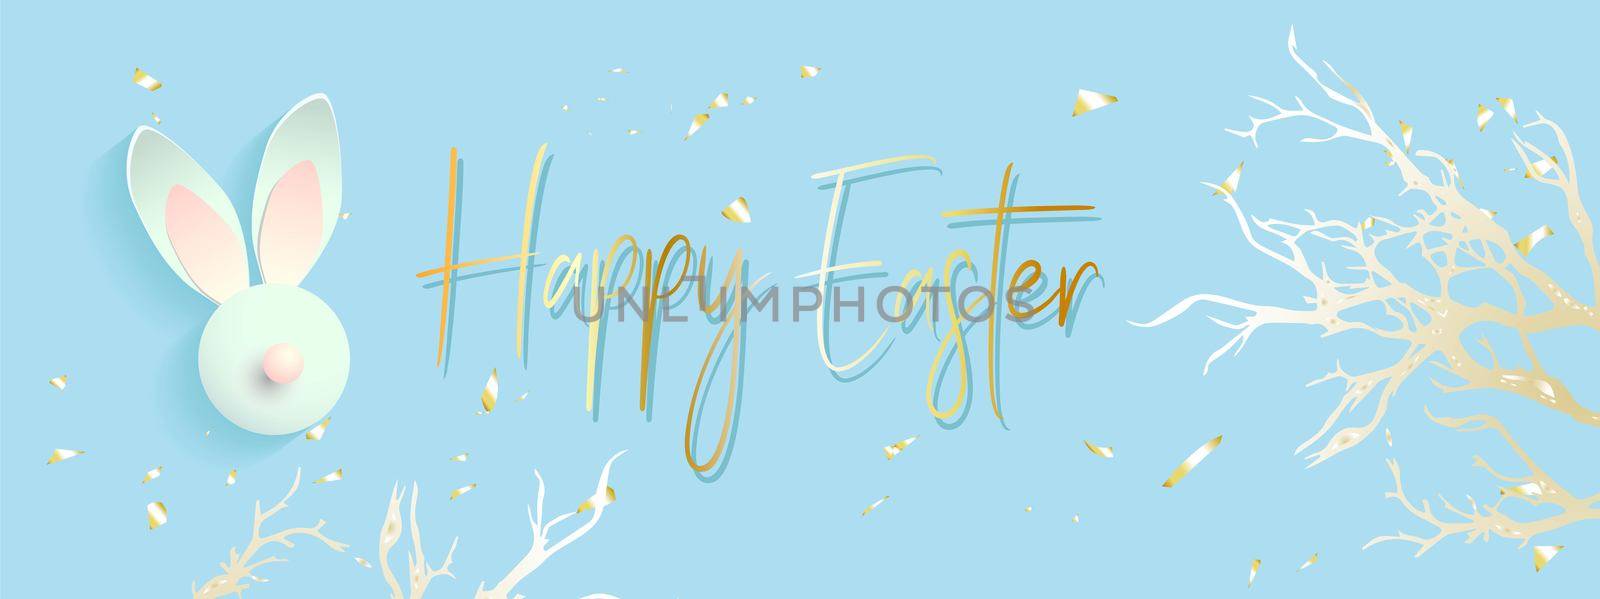 Easter banner background template with beautiful colorful spring rabbits. illustration. Easter background with realistic objects, golden metal confetti, decorative branch. Spring traditional de. by annatarankova